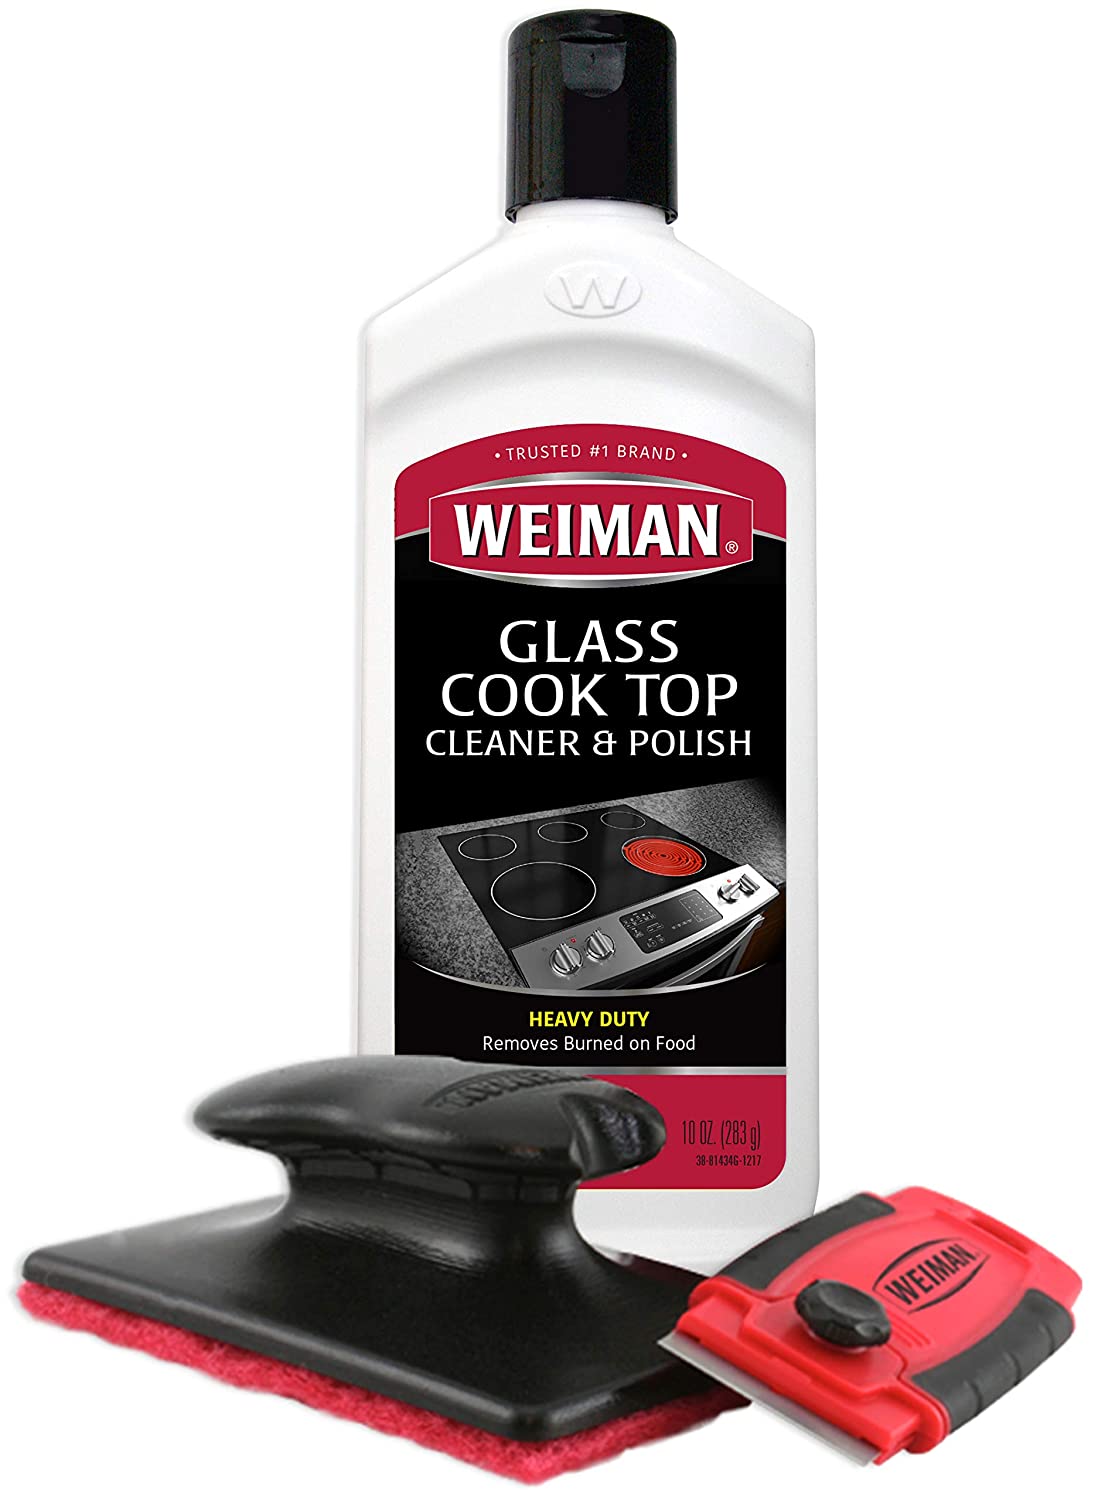 Weiman Cooktop and Stove Top Cleaner Kit - Glass Cook [...]